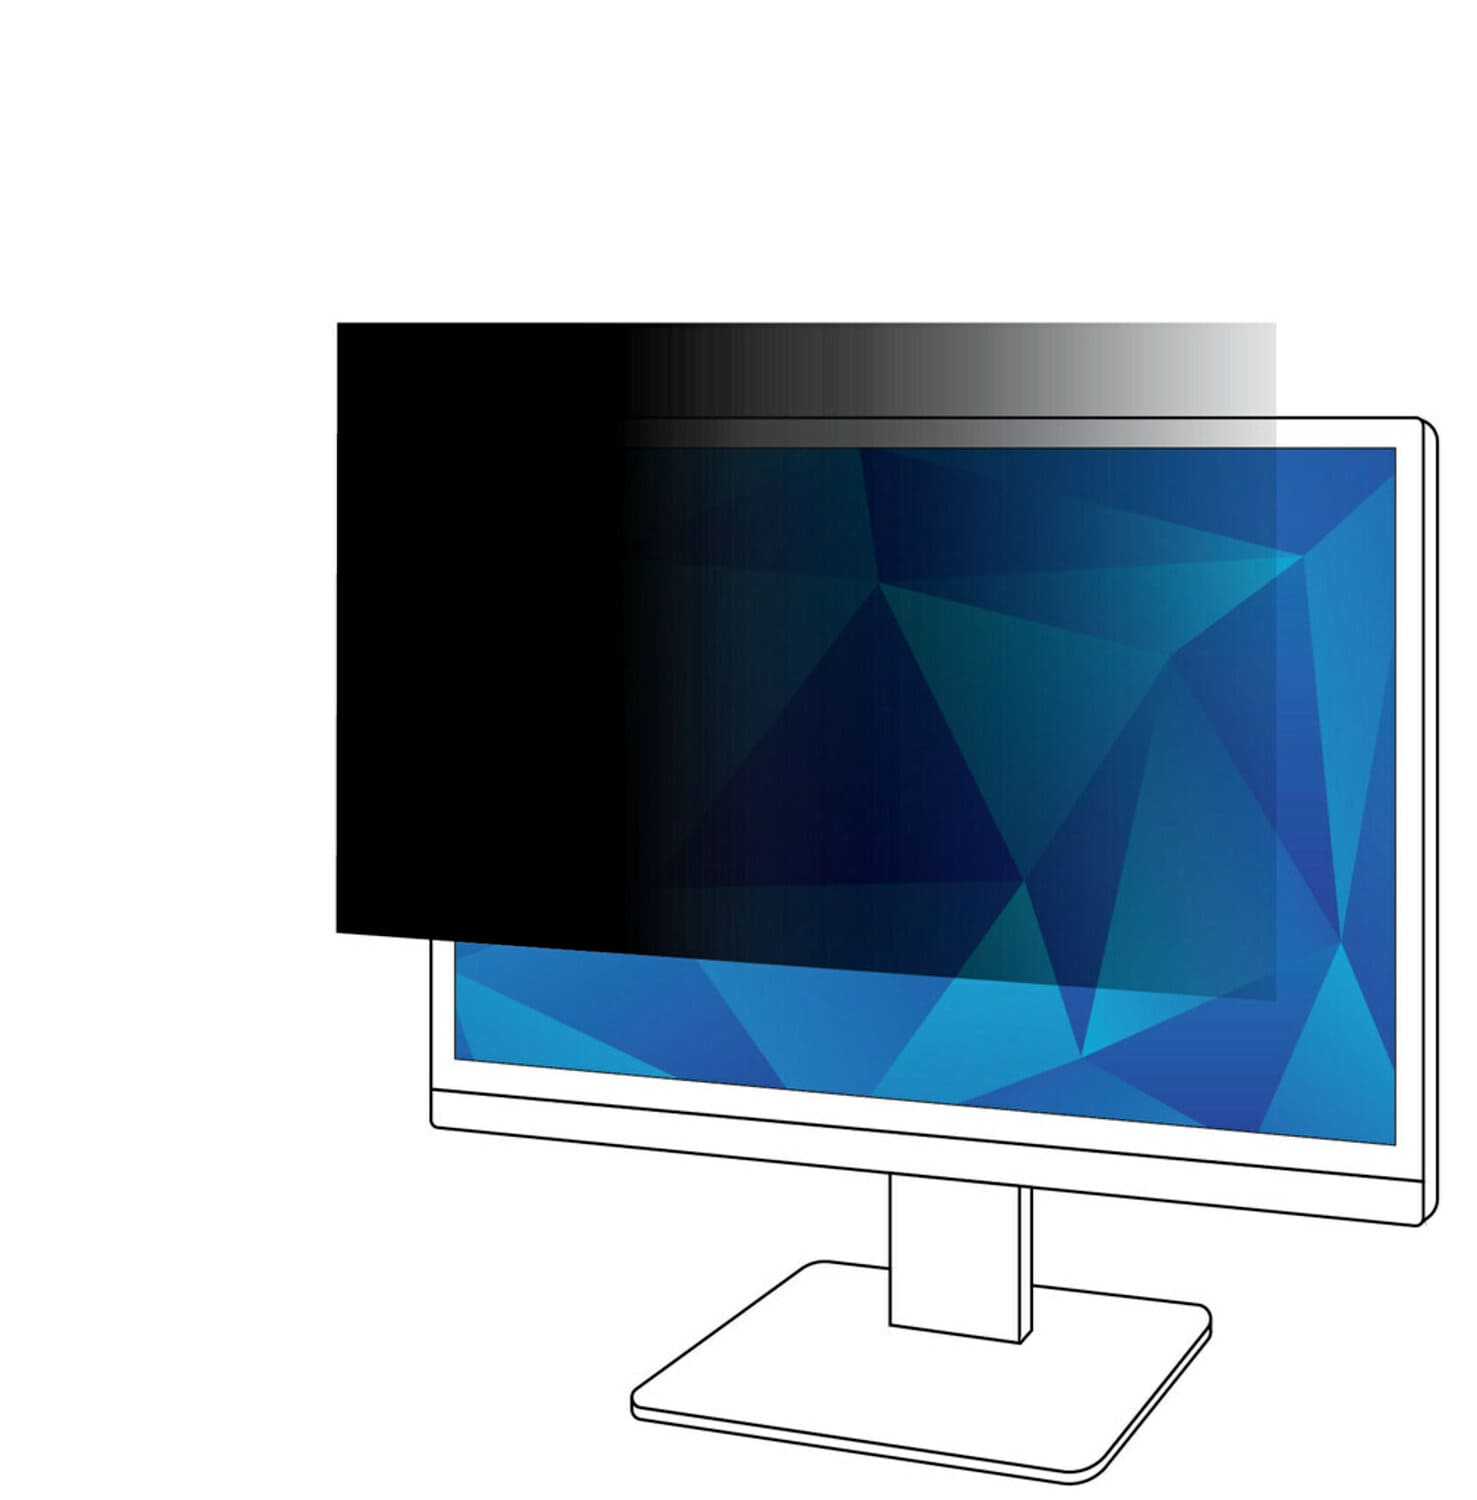 7000059564 - 3M Privacy Filter for 25in Monitor, 16:9, PF250W9B